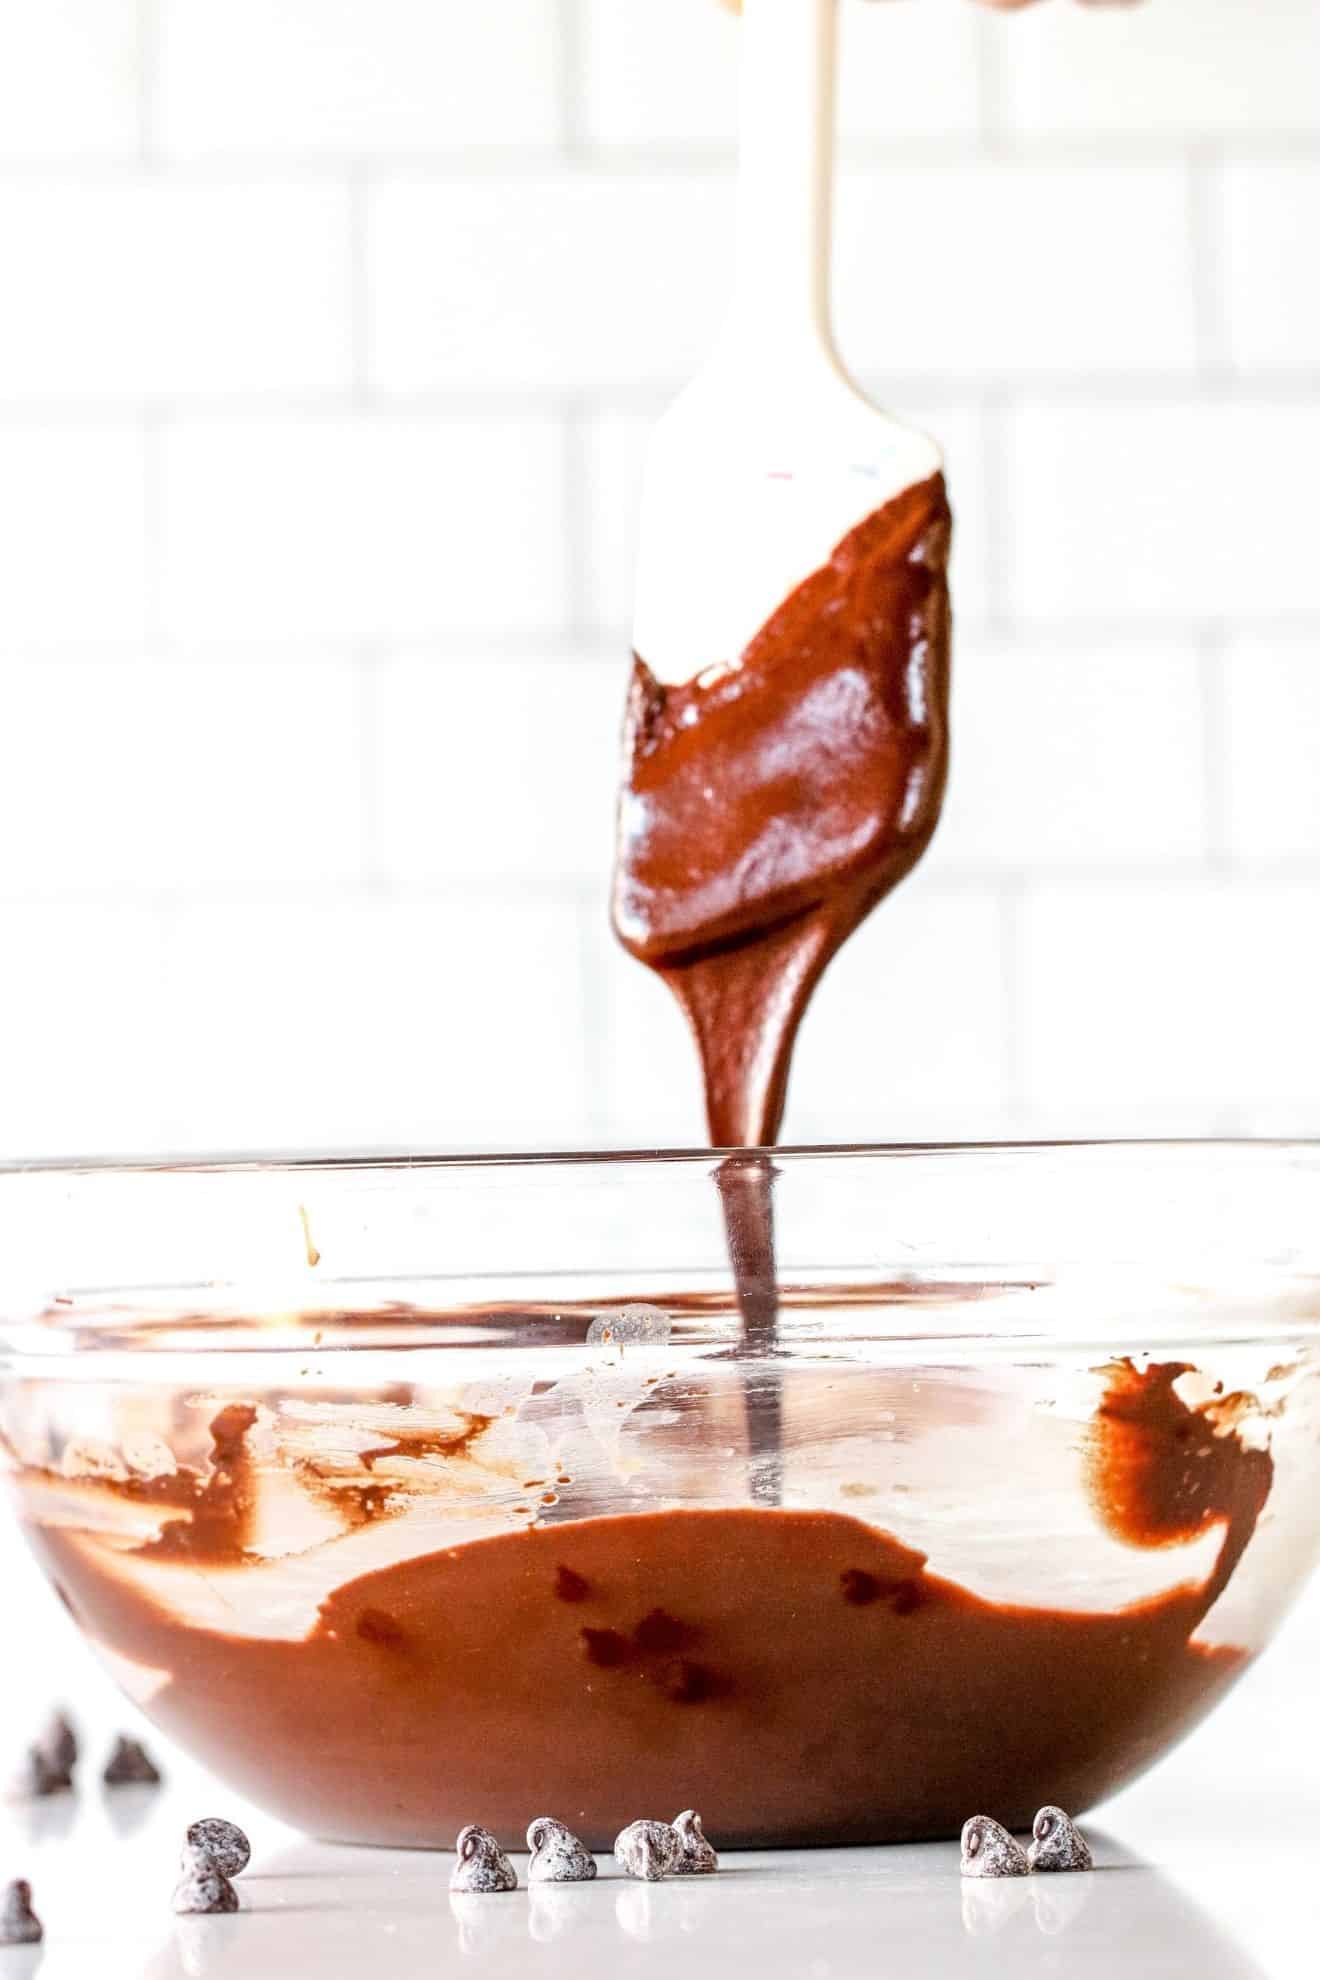 This is a side view of a glass bowl with melted chocolate in it. The bowl sits on a white counter with more chocolate chips scattered around the bowl. A white spatula is being lifted out of the bowl and drizzling the chocolate back into the bowl.